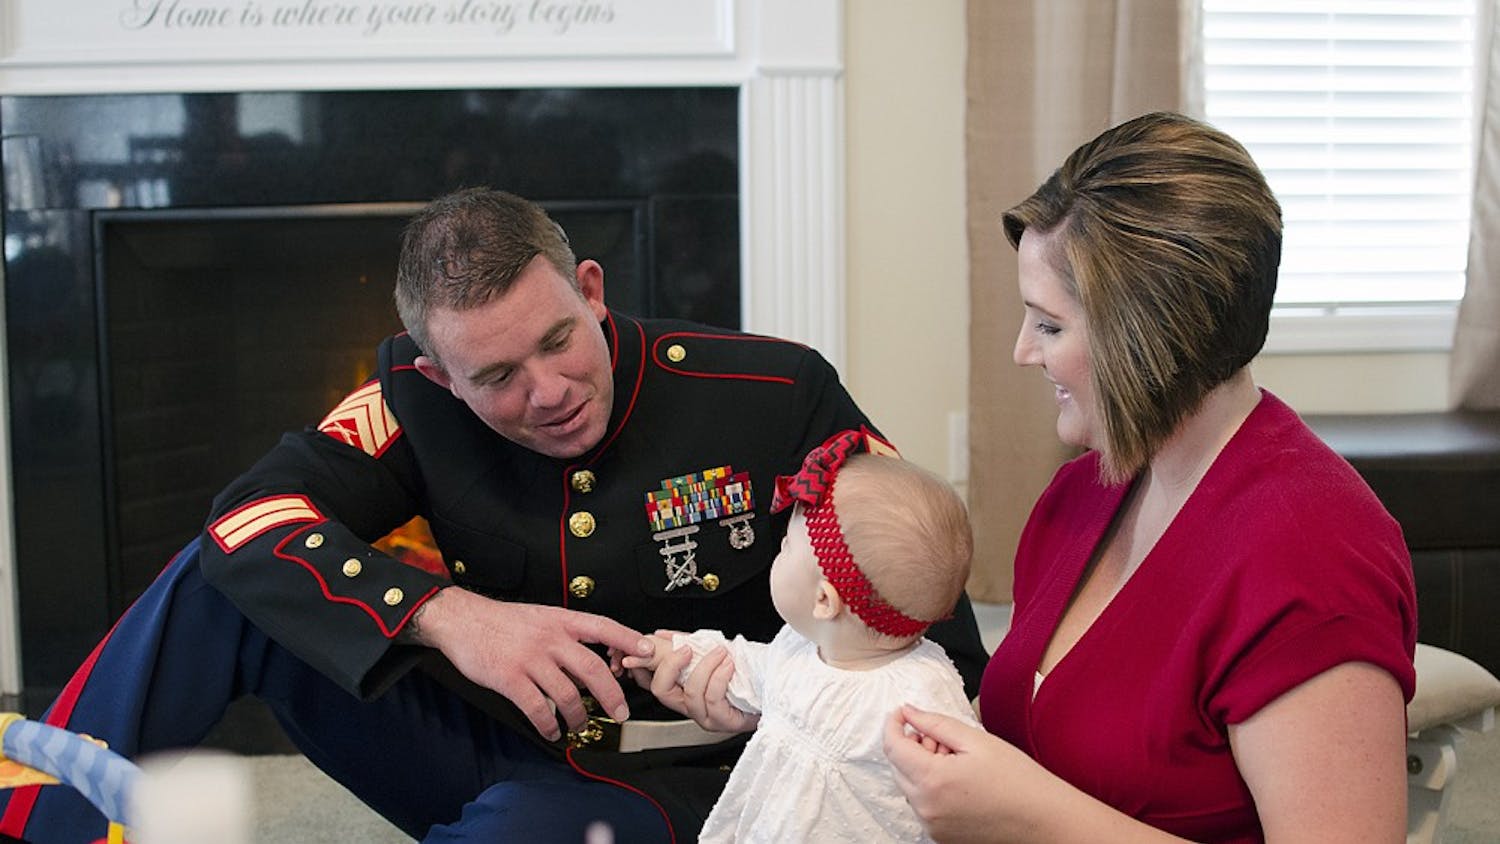 Marine Corps veteran Dac Carpenter and his wife Holly play with their daughter. An implant let Dac Carpenter regain all of the hearing in his left ear.